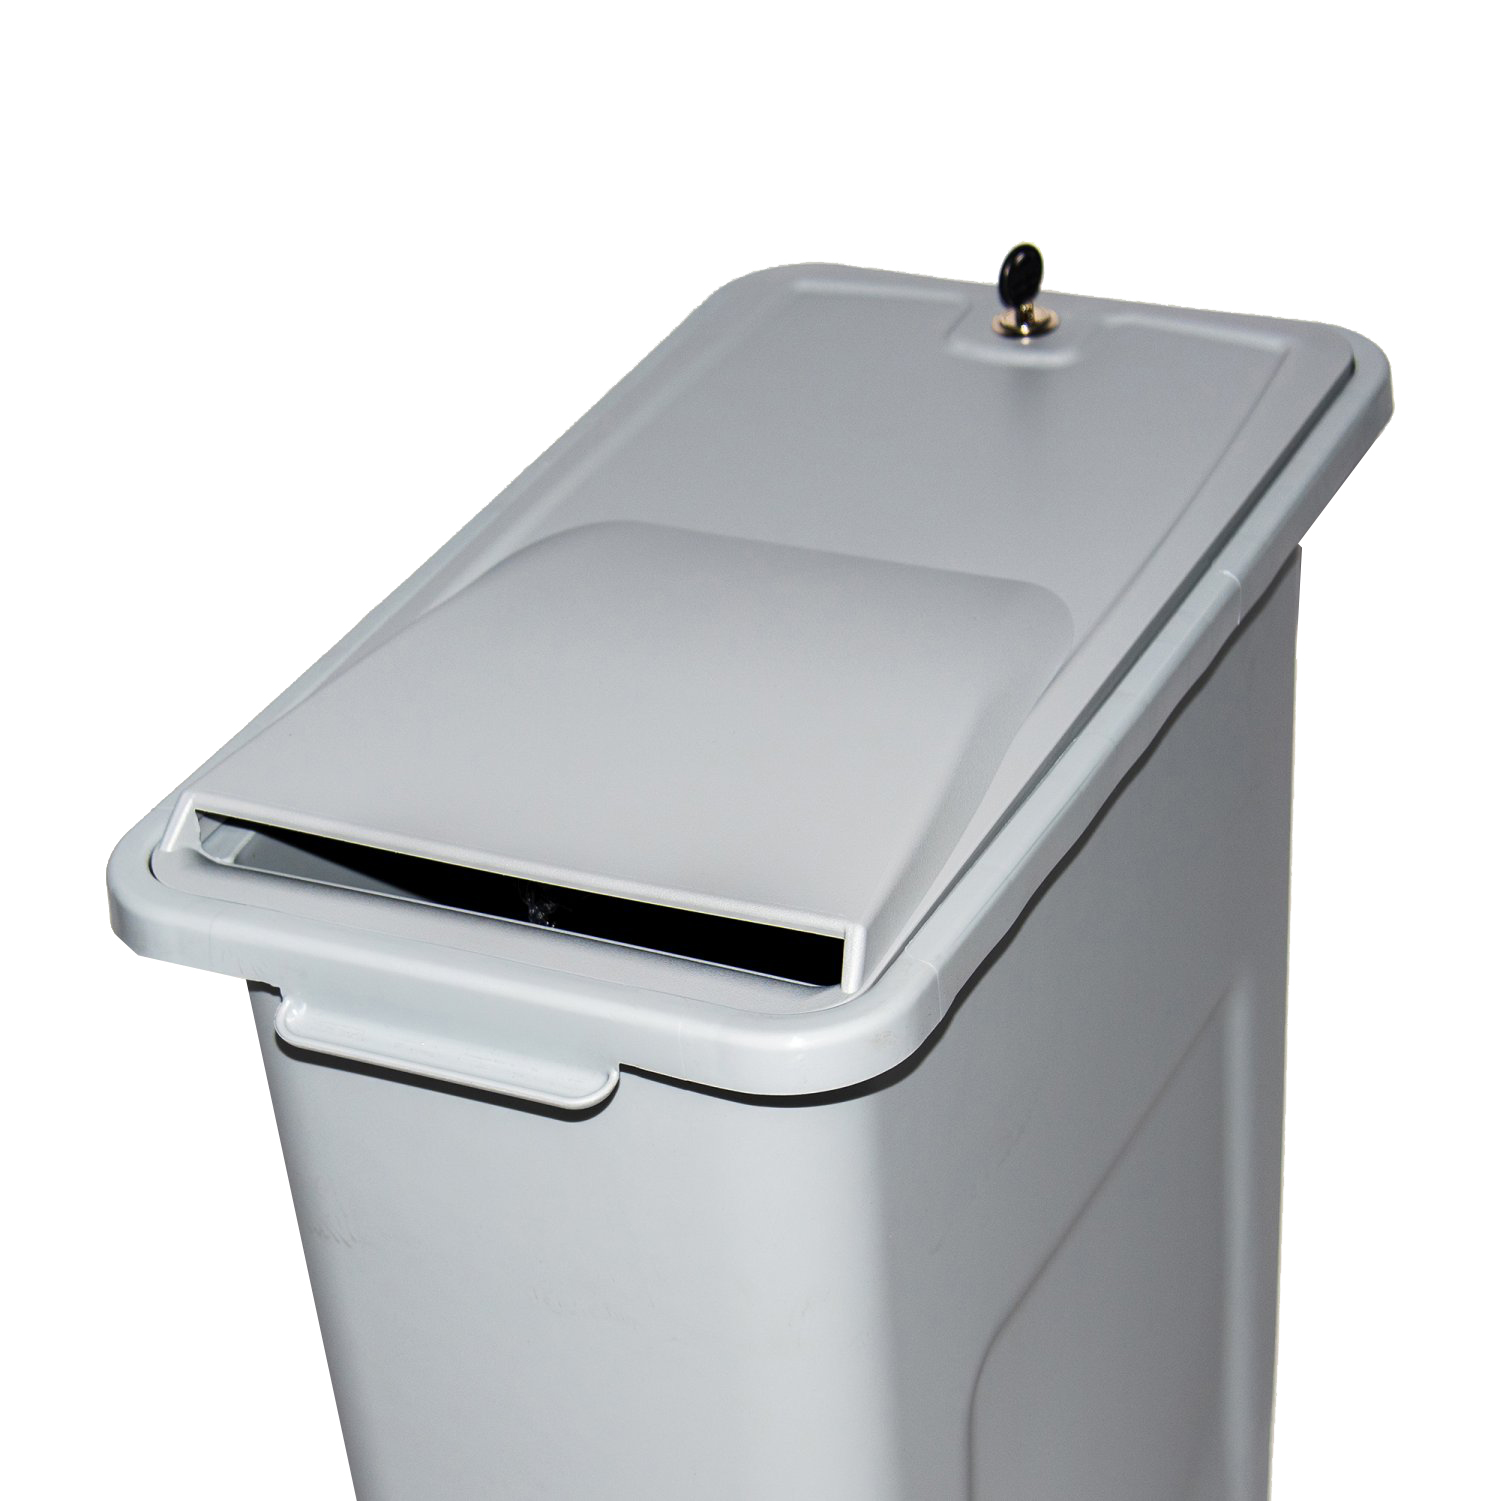 Shredinator bin 87 liters, gray, lid with lock, for collecting confidential documents detail 3